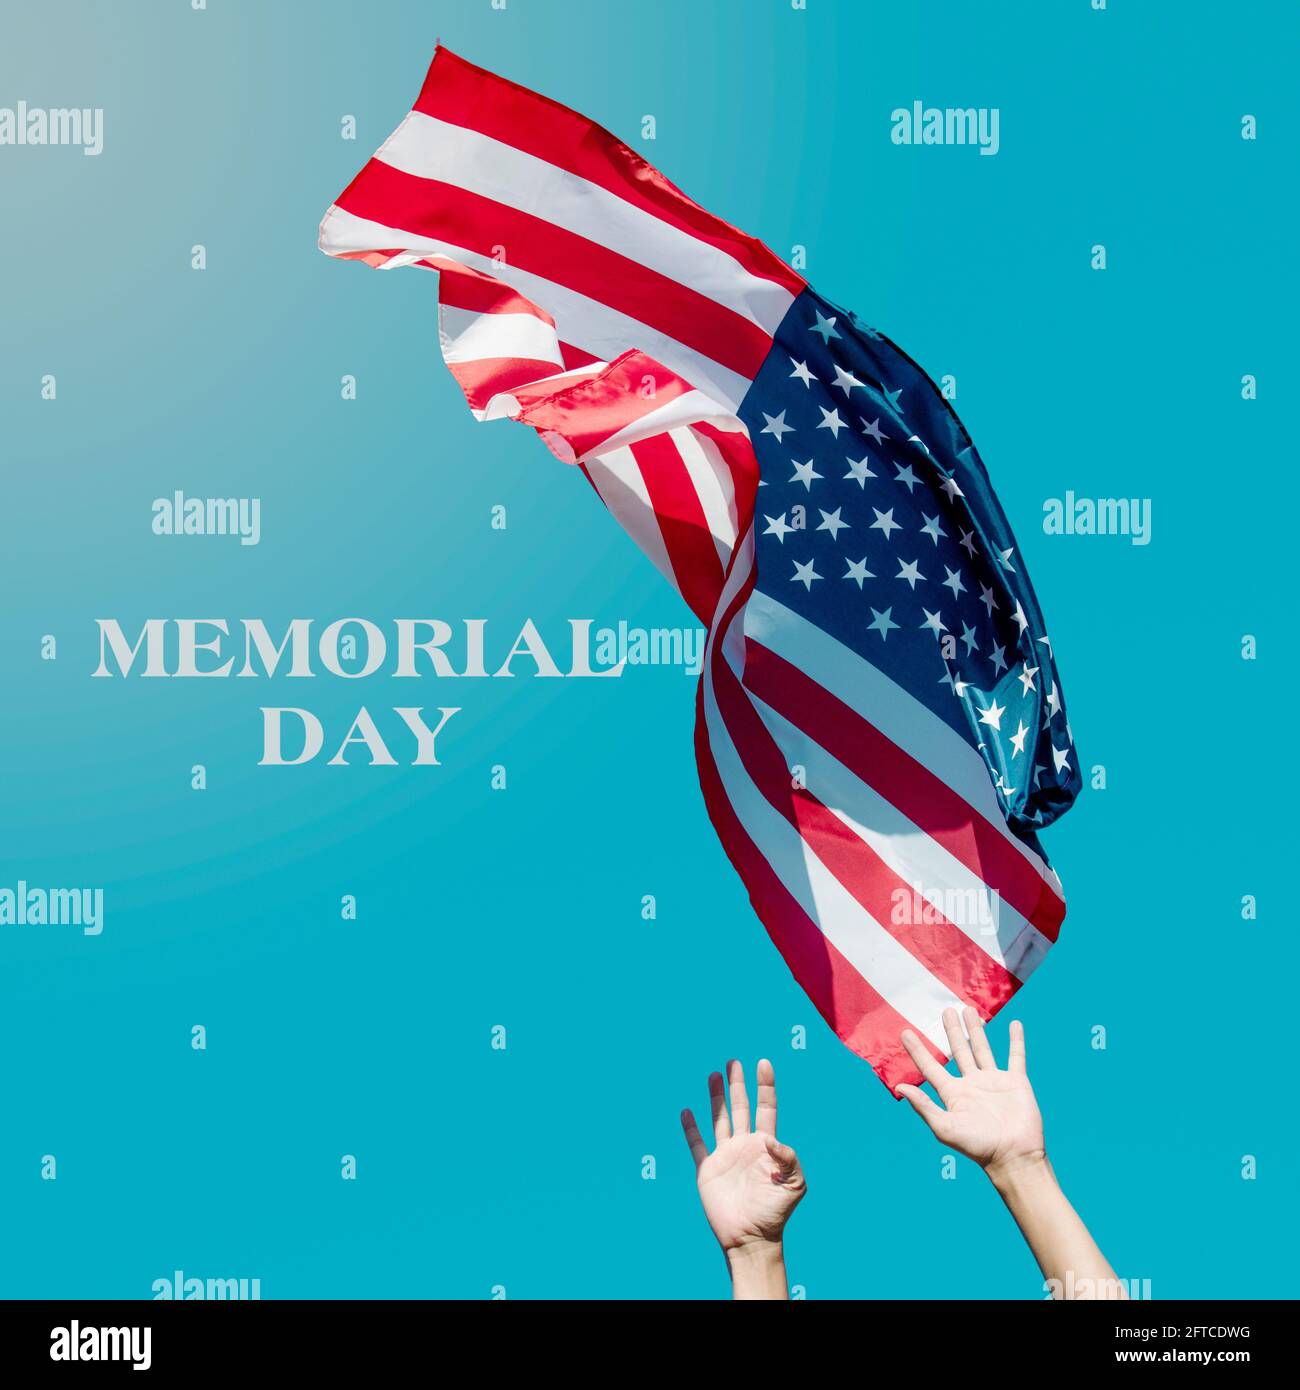 the text memorial day and a young caucasian man launching a flag of the United States to the blue sky, or about to catch it as it flights in the air Stock Photo